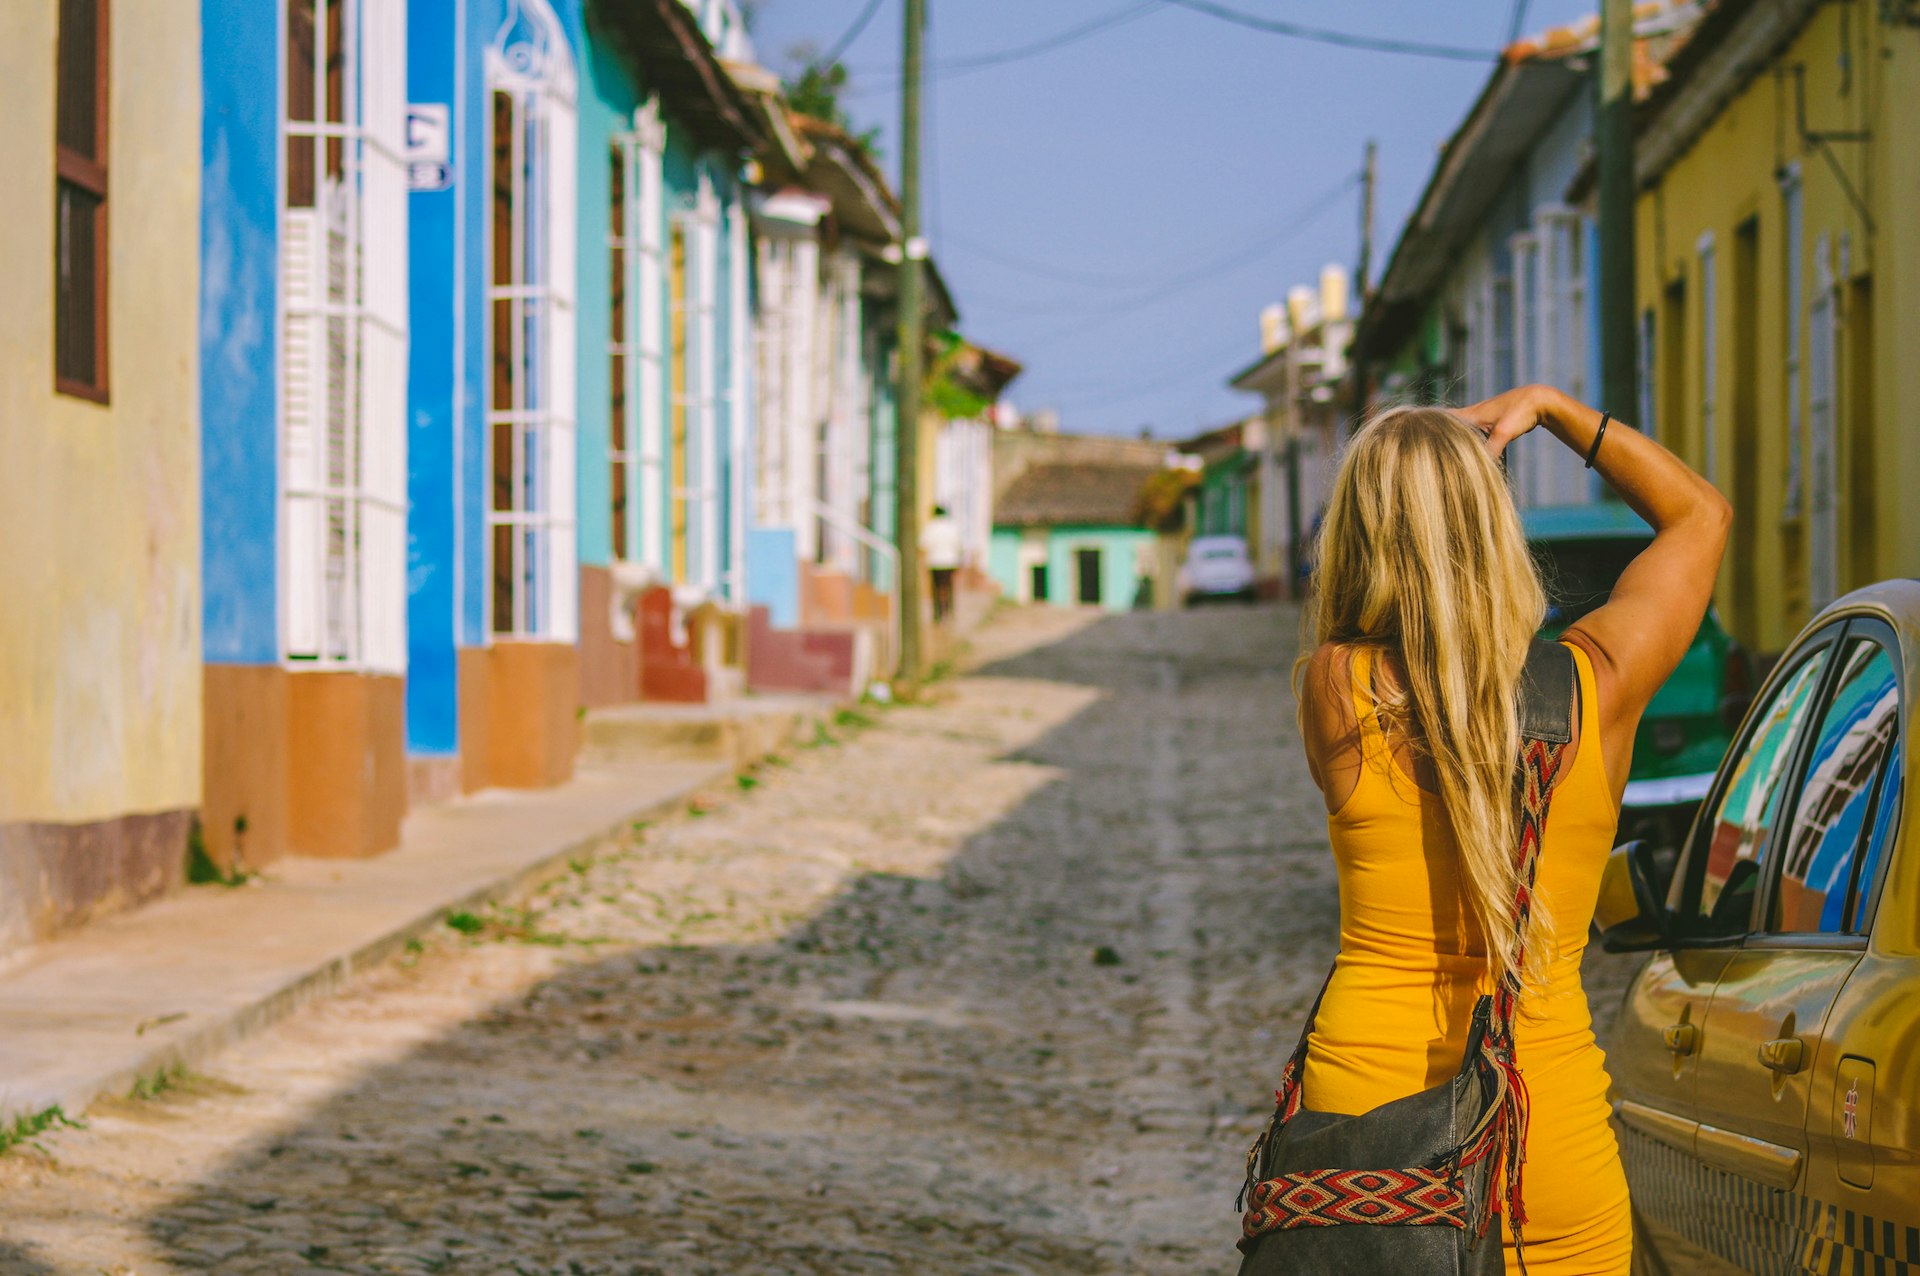 Young blonde girl photographing a street in Trinidad with a colorful yellow dress contrasting with the old empty street popular for tourists and locals